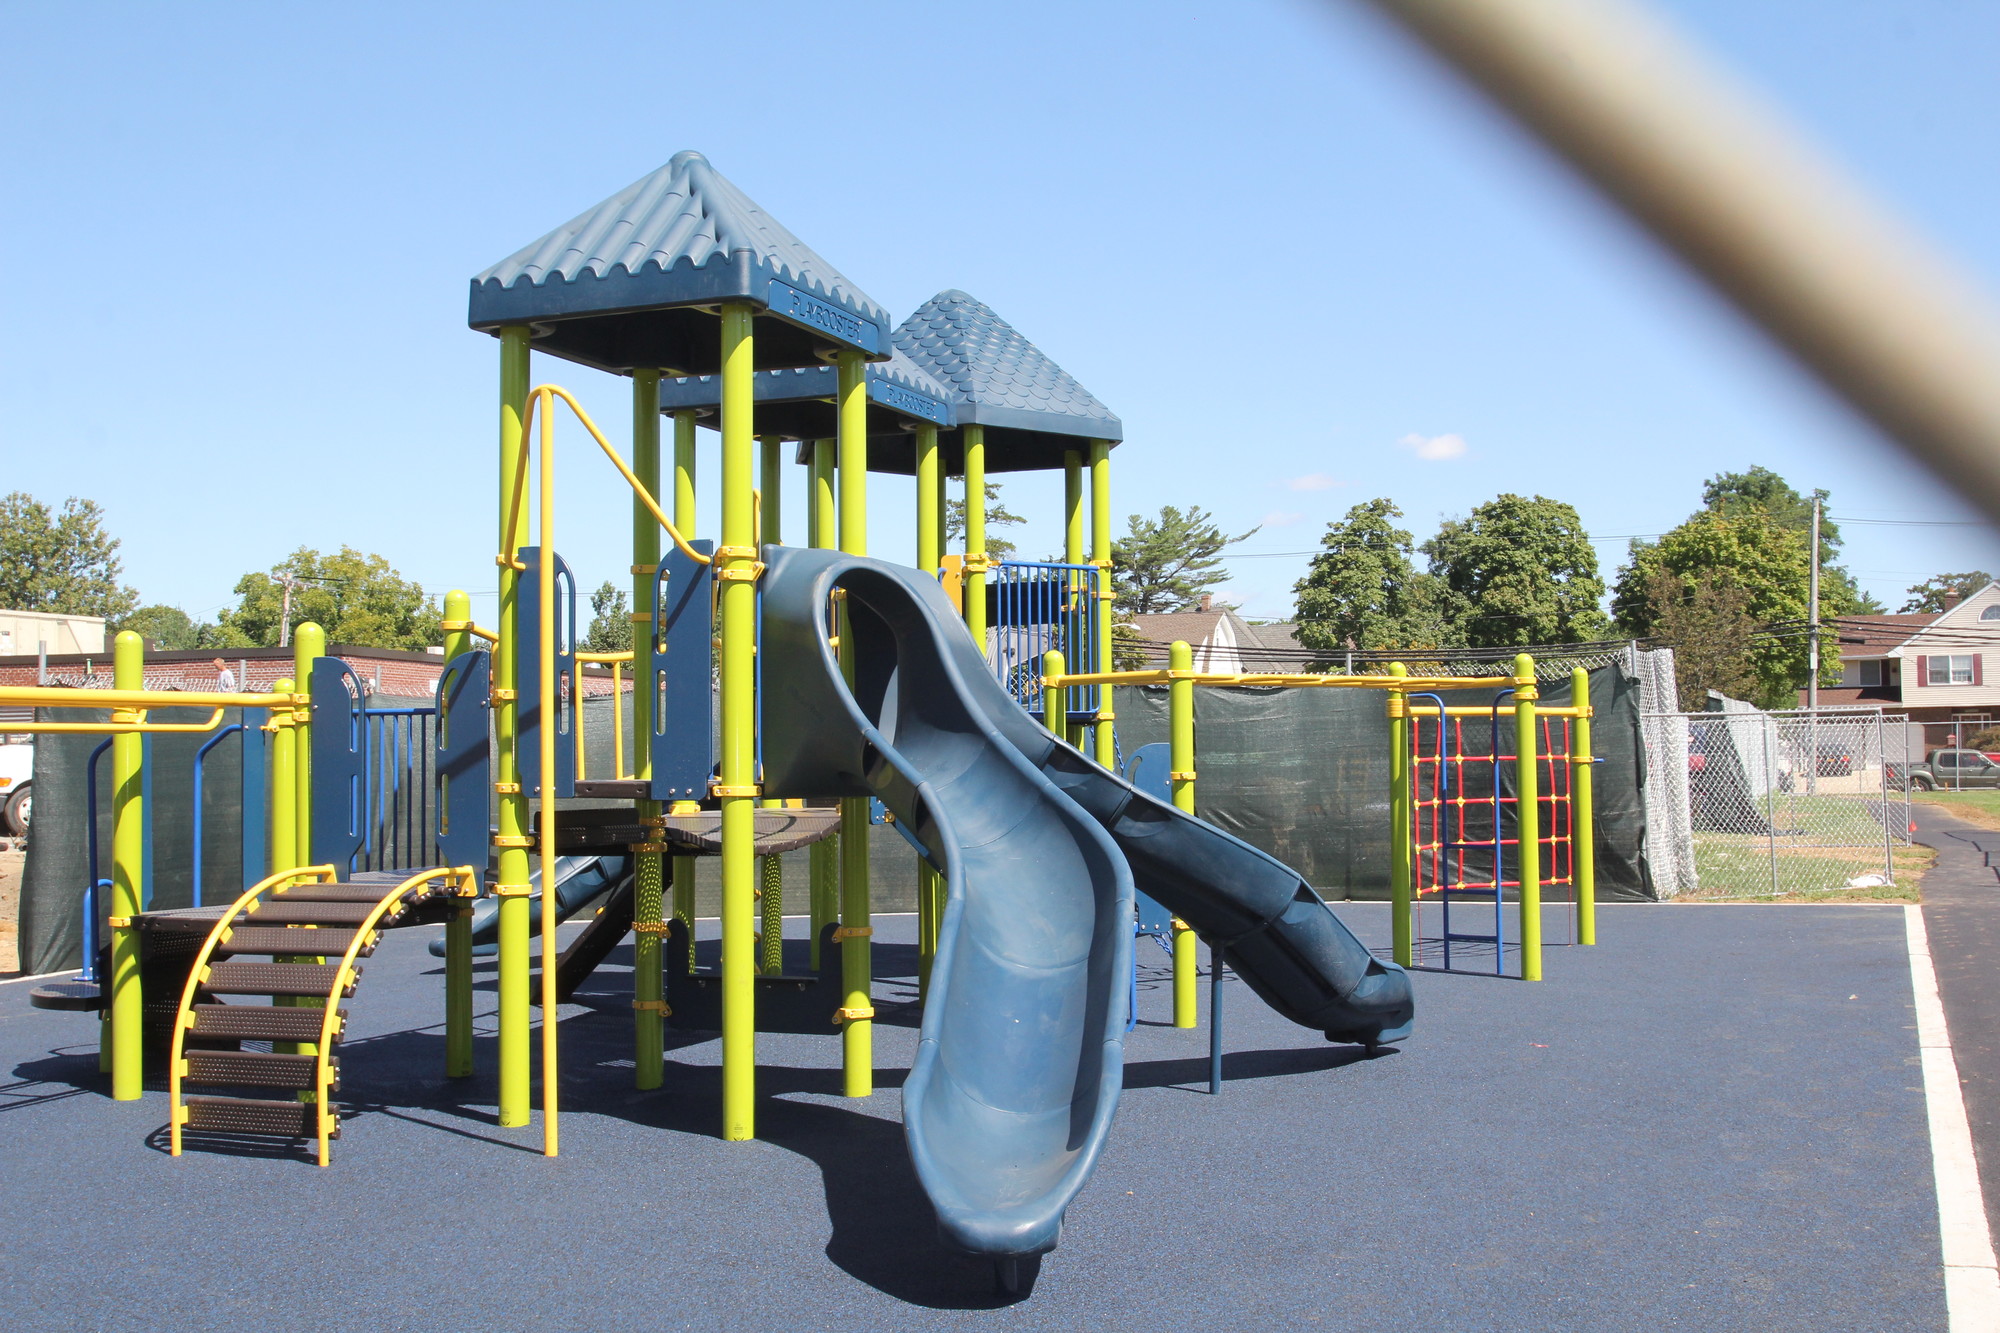 The new playground at Watson is assembled and ready for students to play on when school resumes this week.